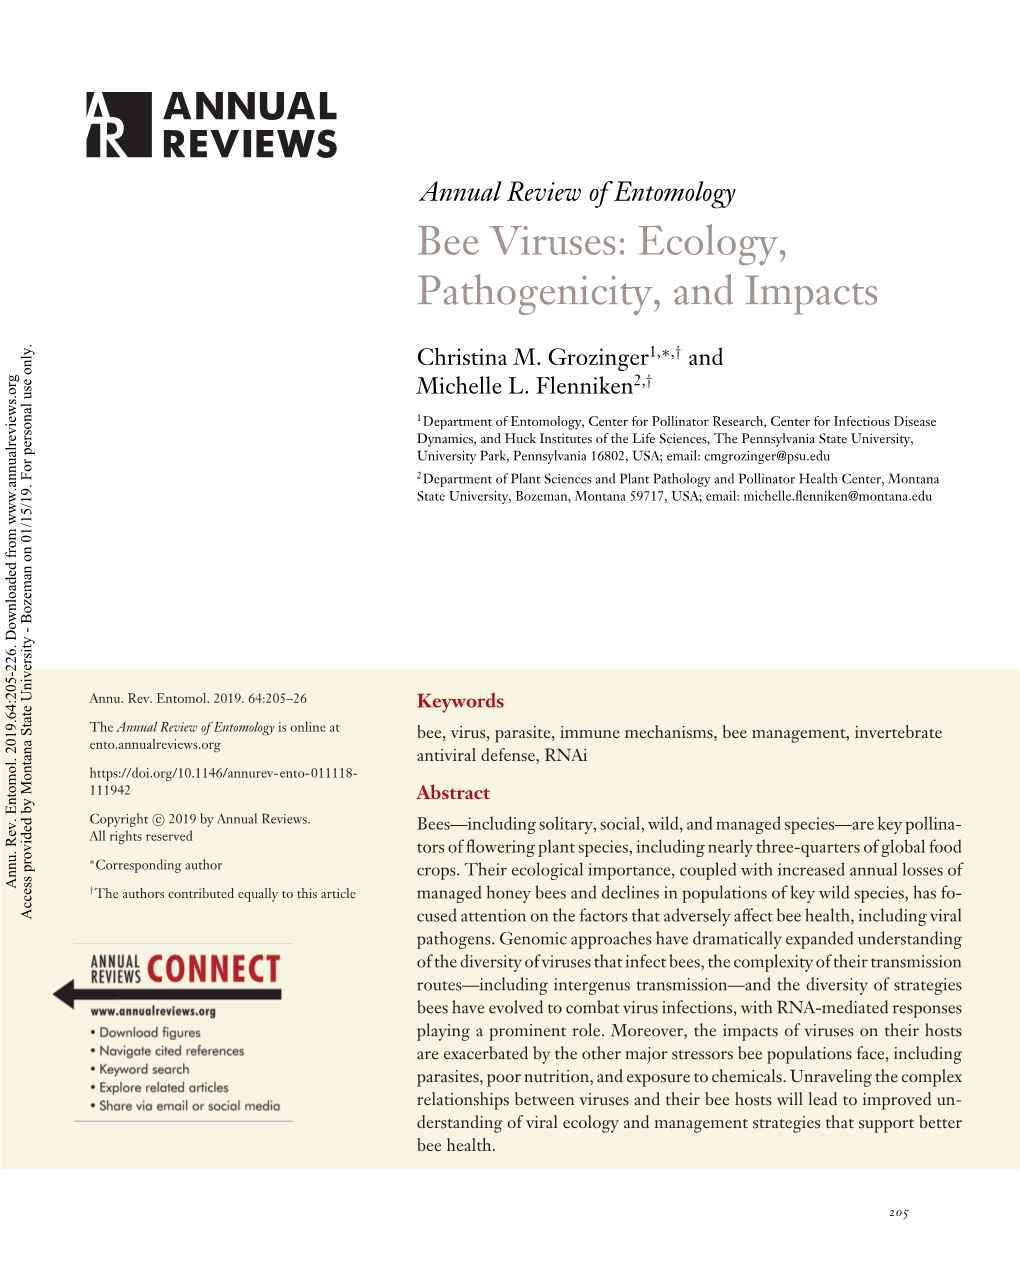 Bee Viruses: Ecology, Pathogenicity, and Impacts